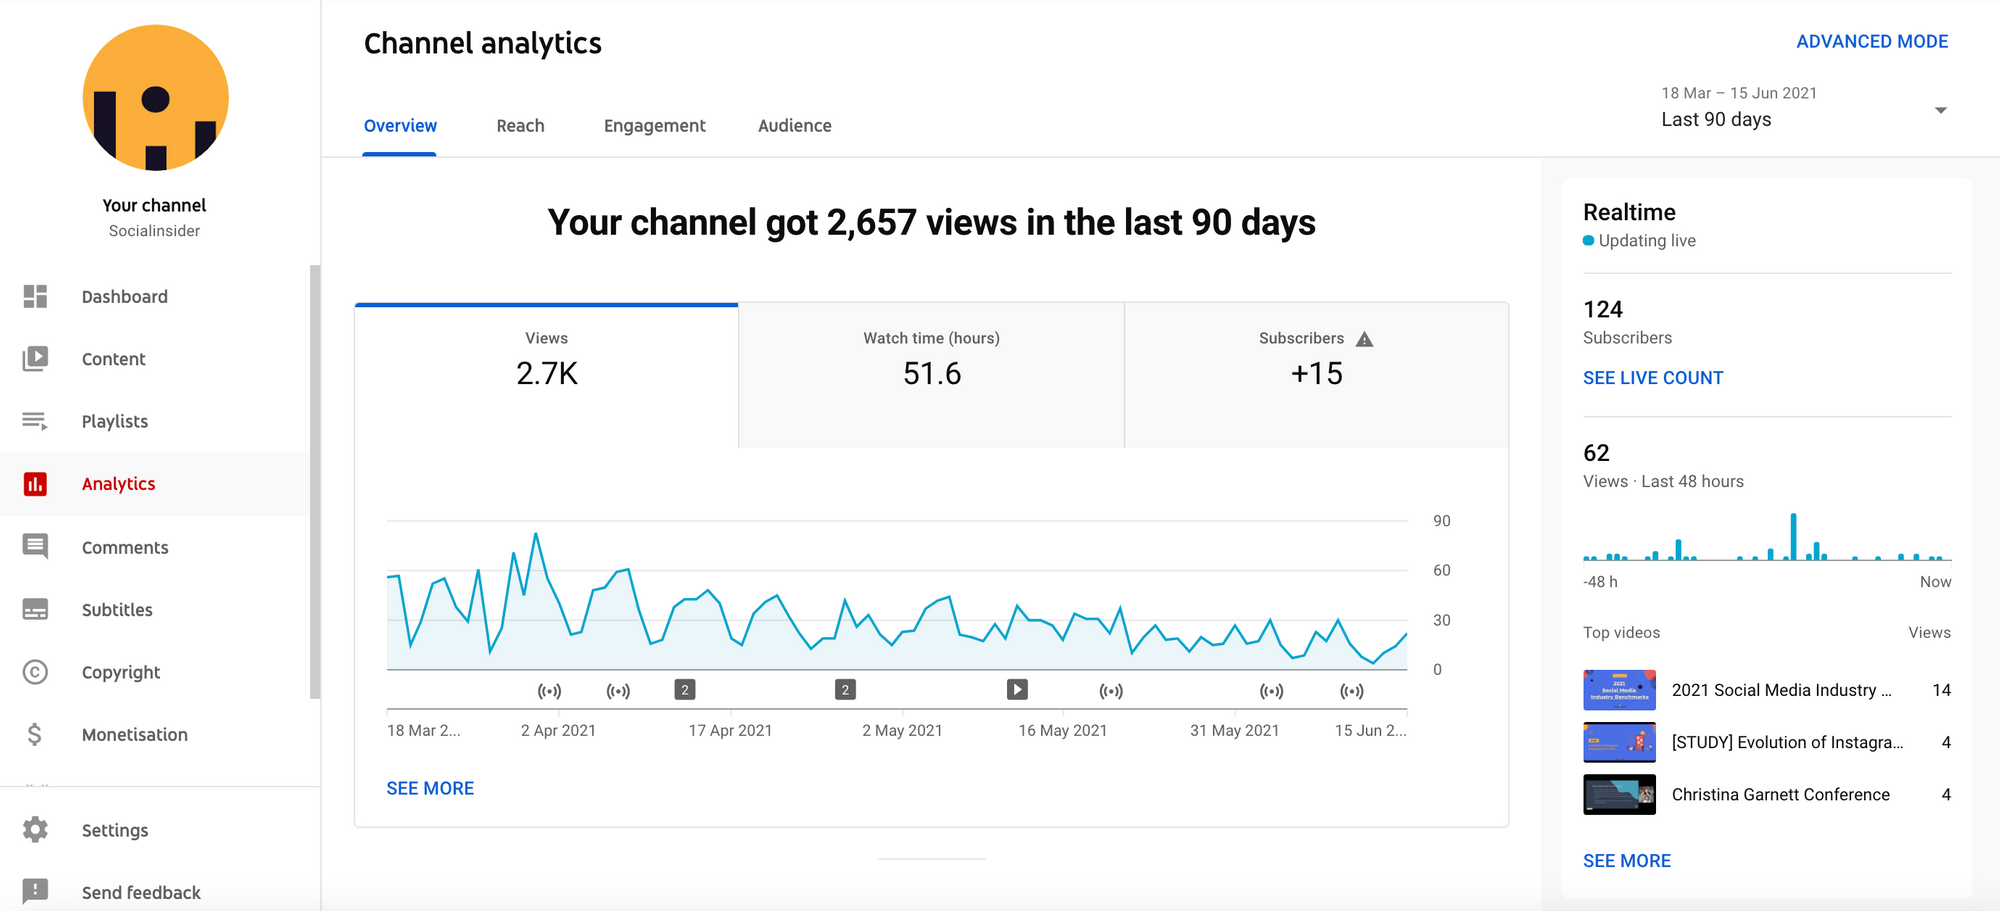 This is how youtube analytics appear for Socialinsider's account.